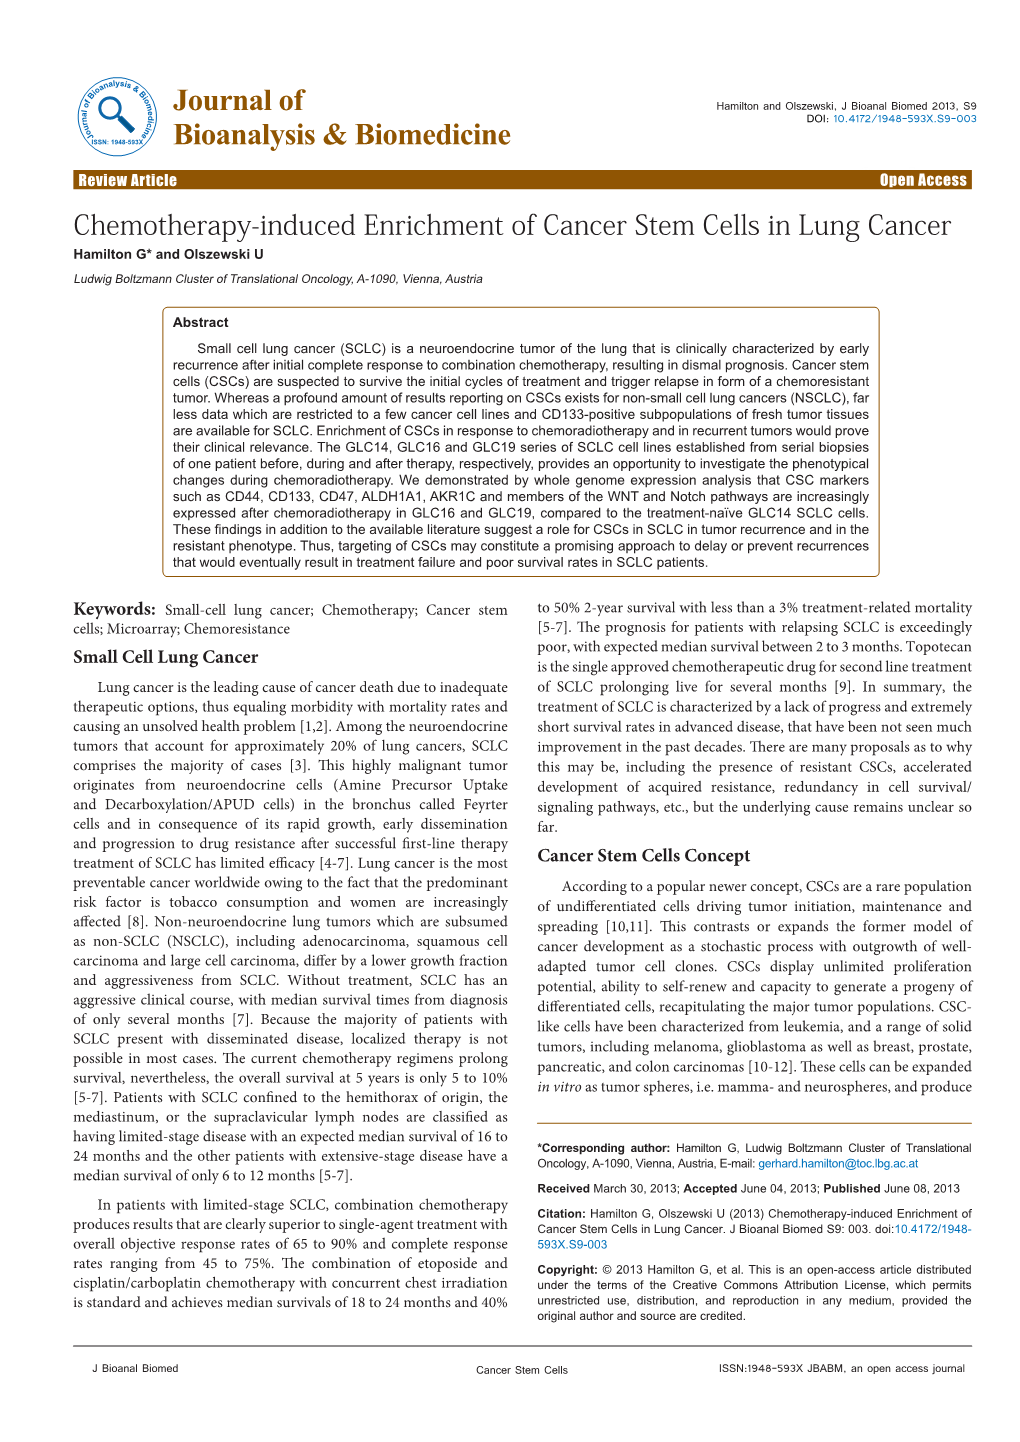 Chemotherapy-Induced Enrichment of Cancer Stem Cells in Lung Cancer